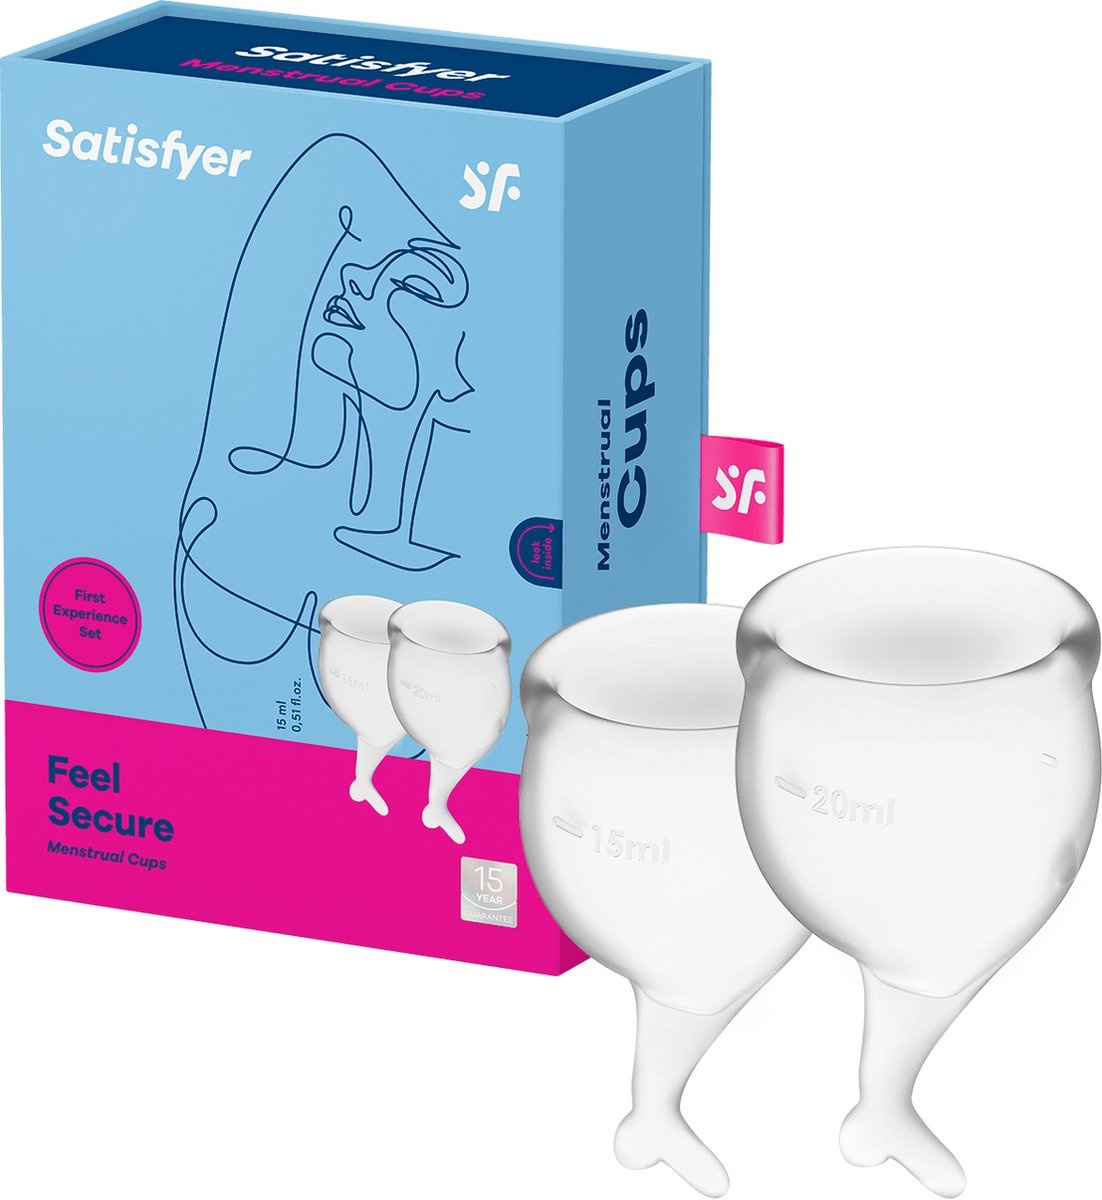 Satisfyer Feel Secure - Coupe menstruelle - 2 pièces - Lilas - Taille M + S